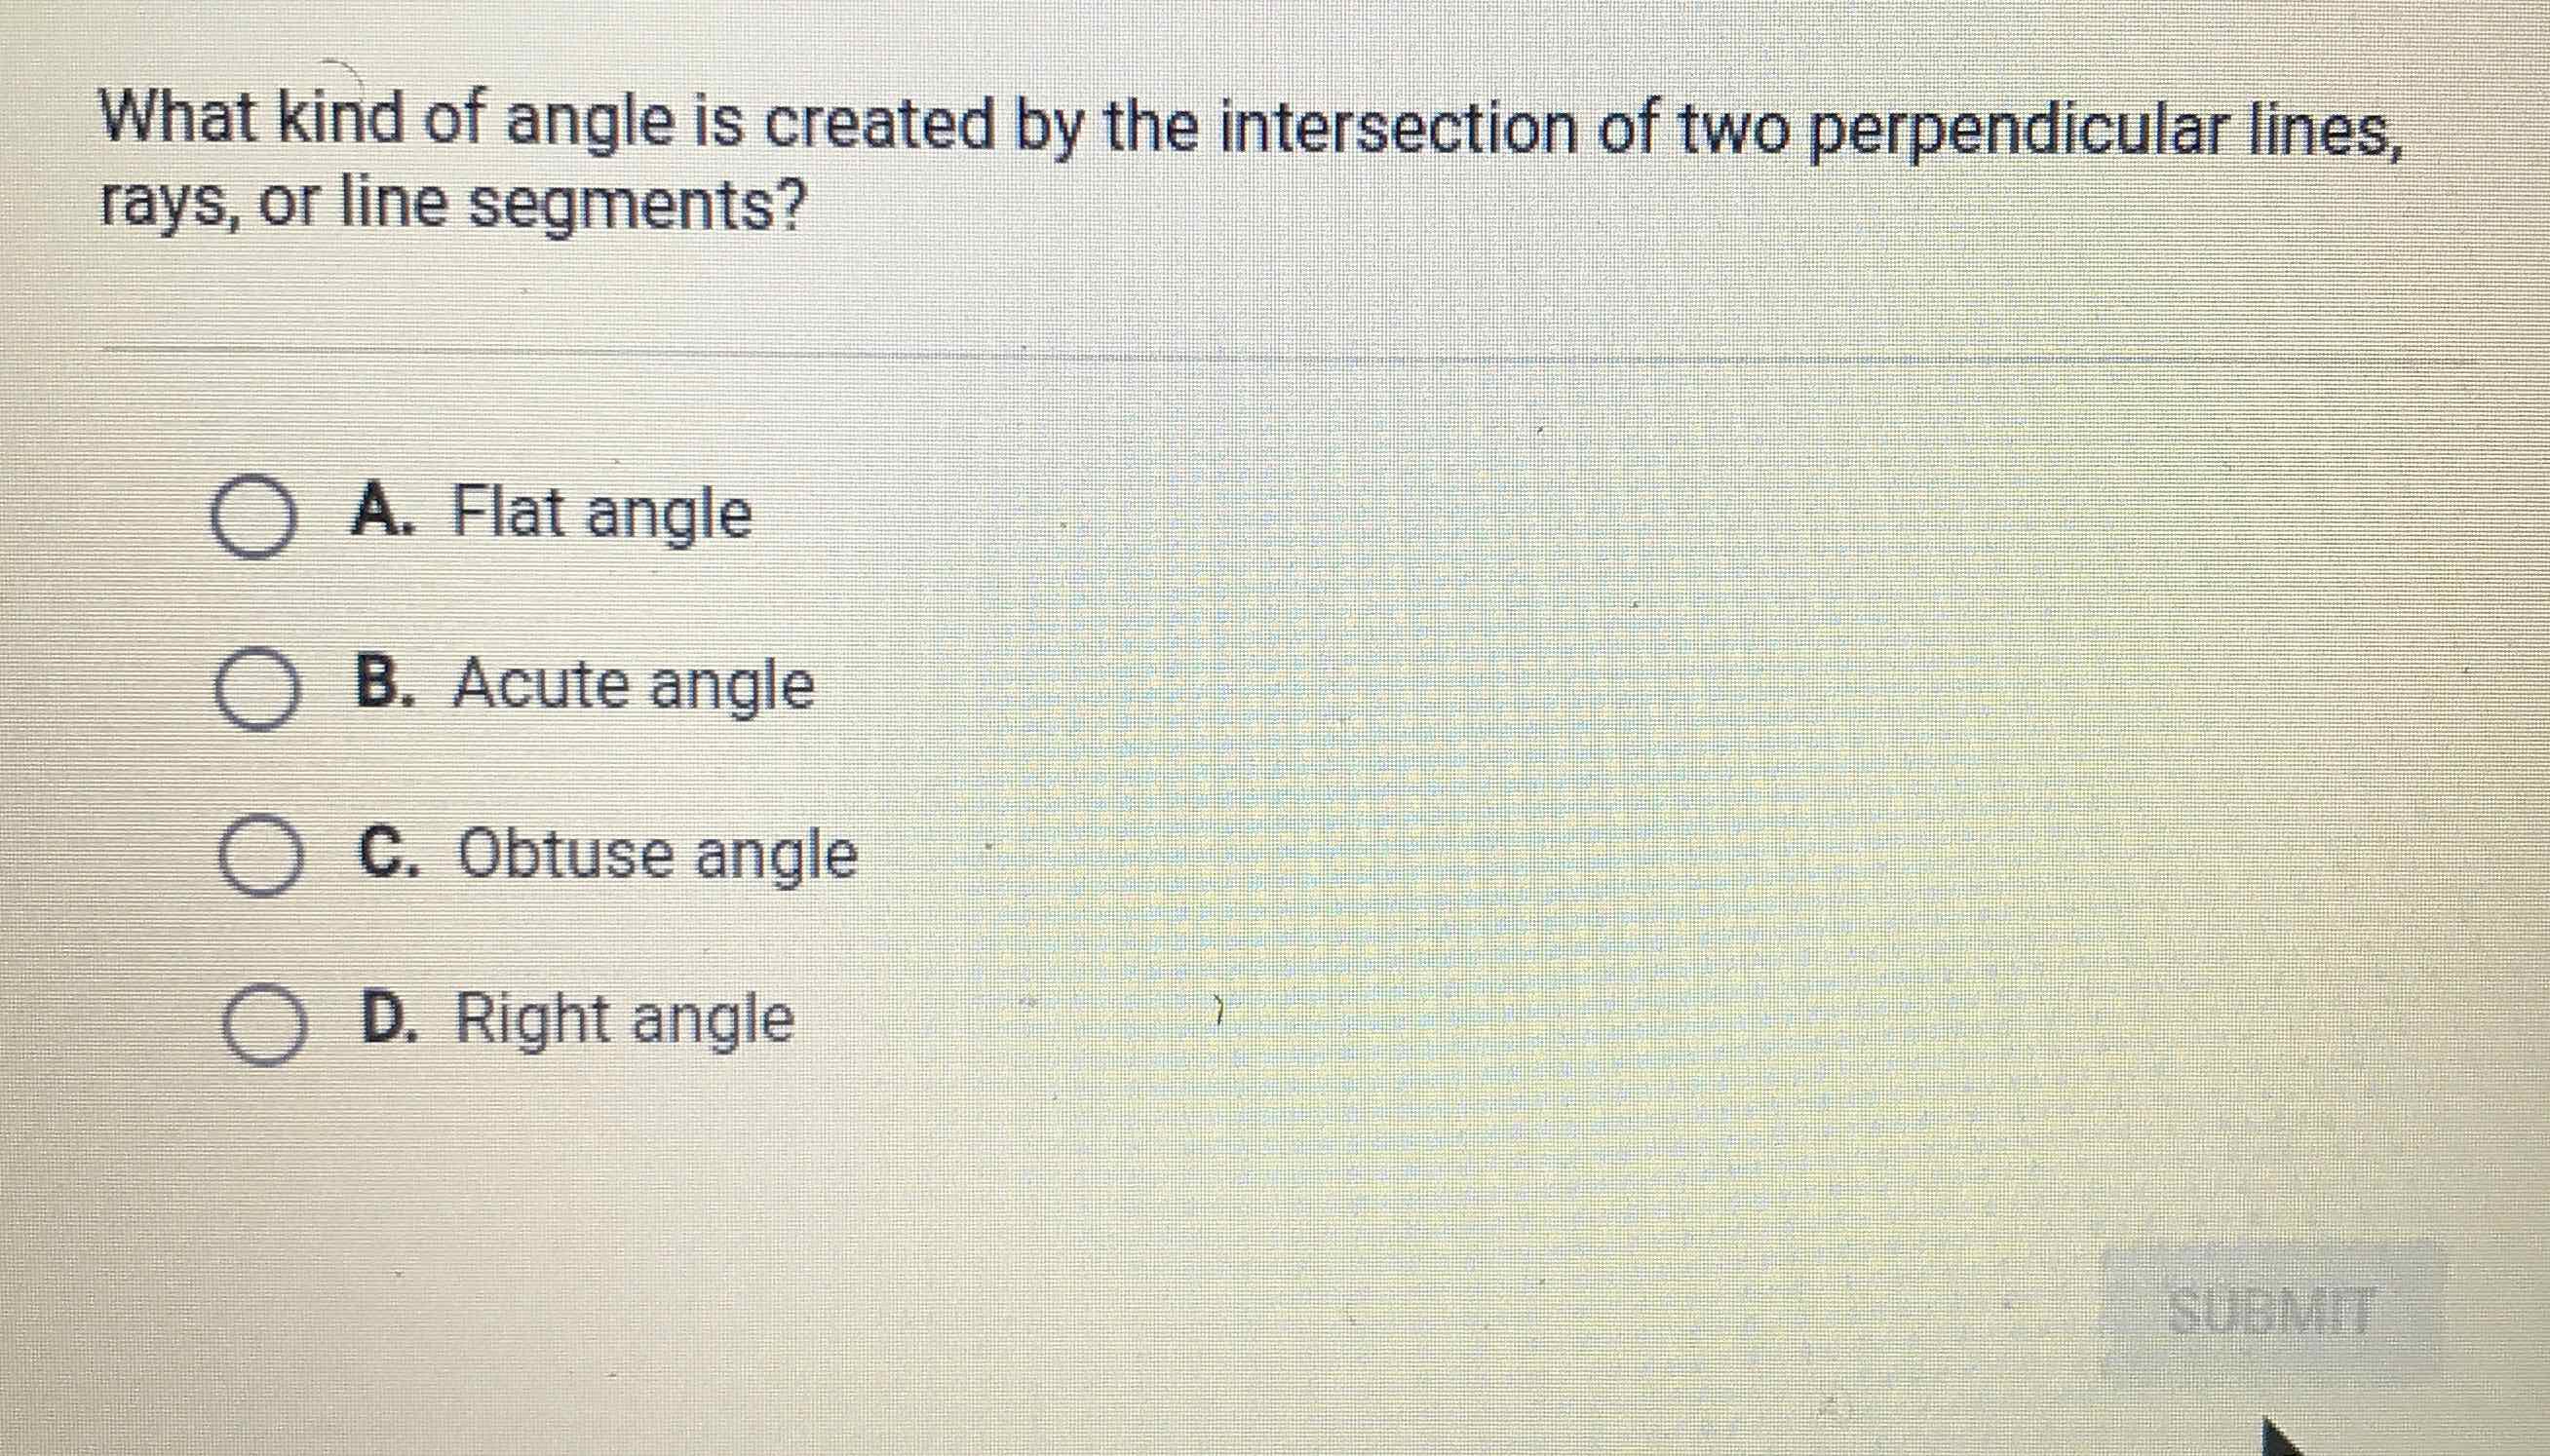 What kind of angle is created by the intersection of two perpendicular lines, rays, or line segments?
A. Flat angle
B. Acute angle
C. Obtuse angle
D. Right angle